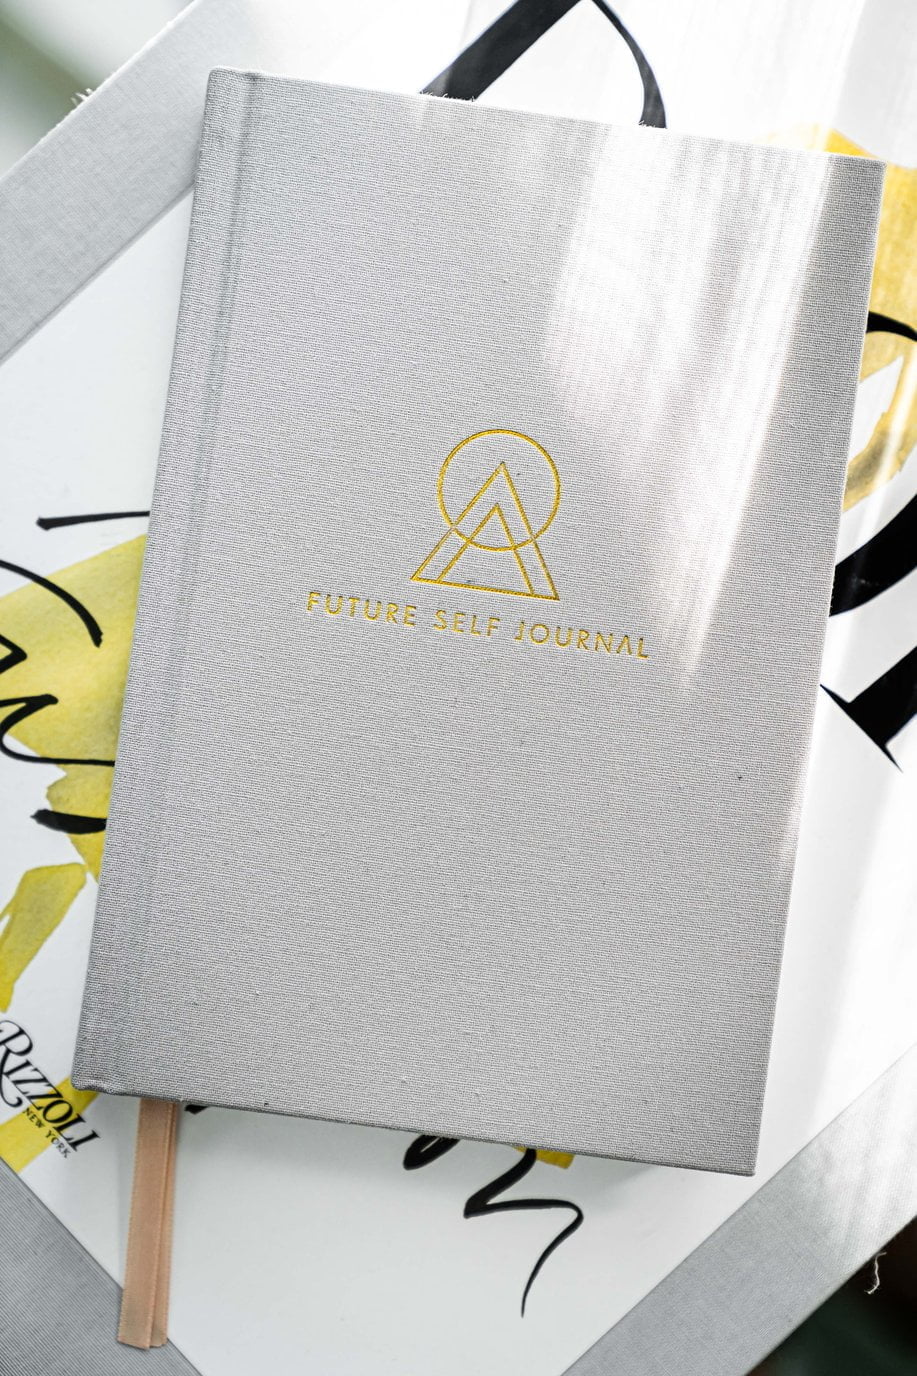 10% Off With Future Self Journal Voucher Code